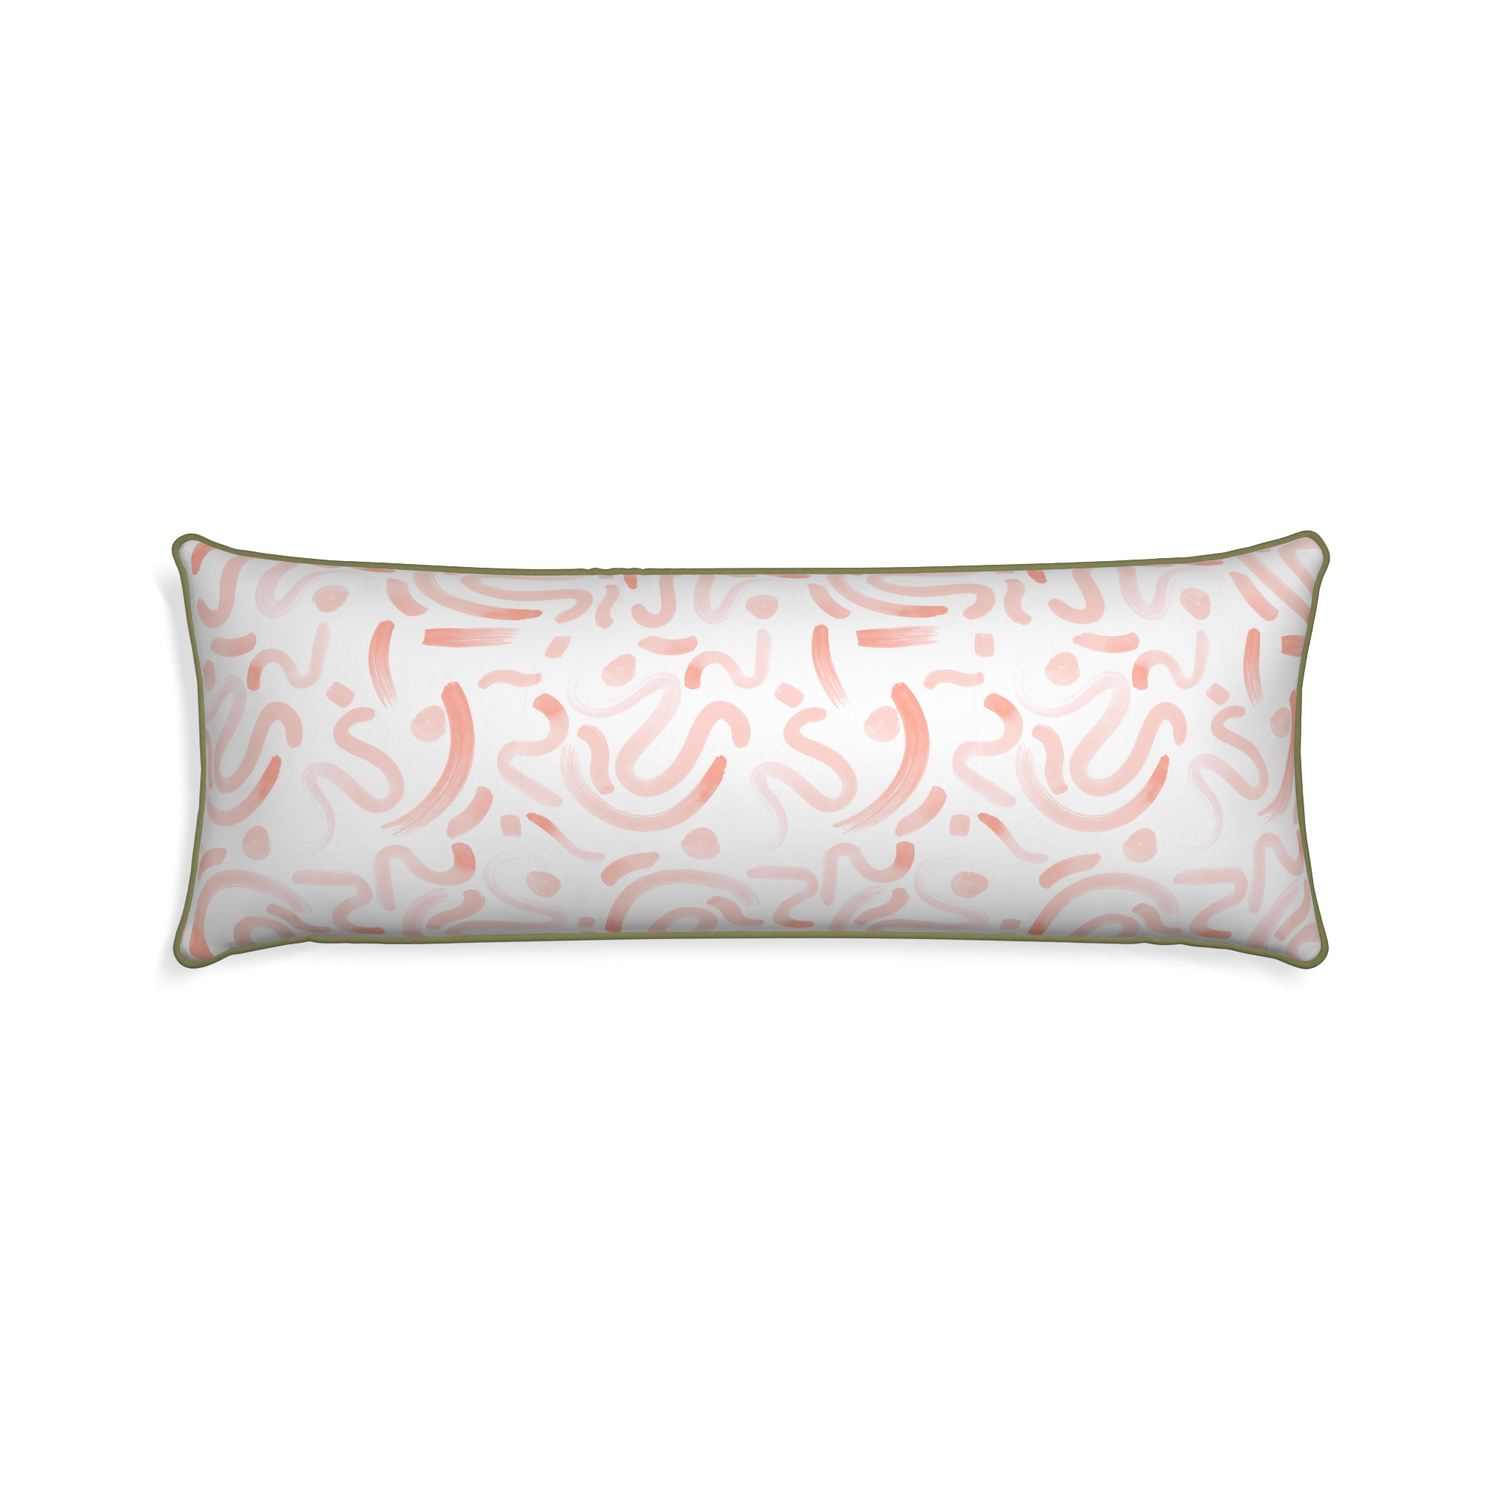 Xl-lumbar hockney pink custom pink graphicpillow with moss piping on white background